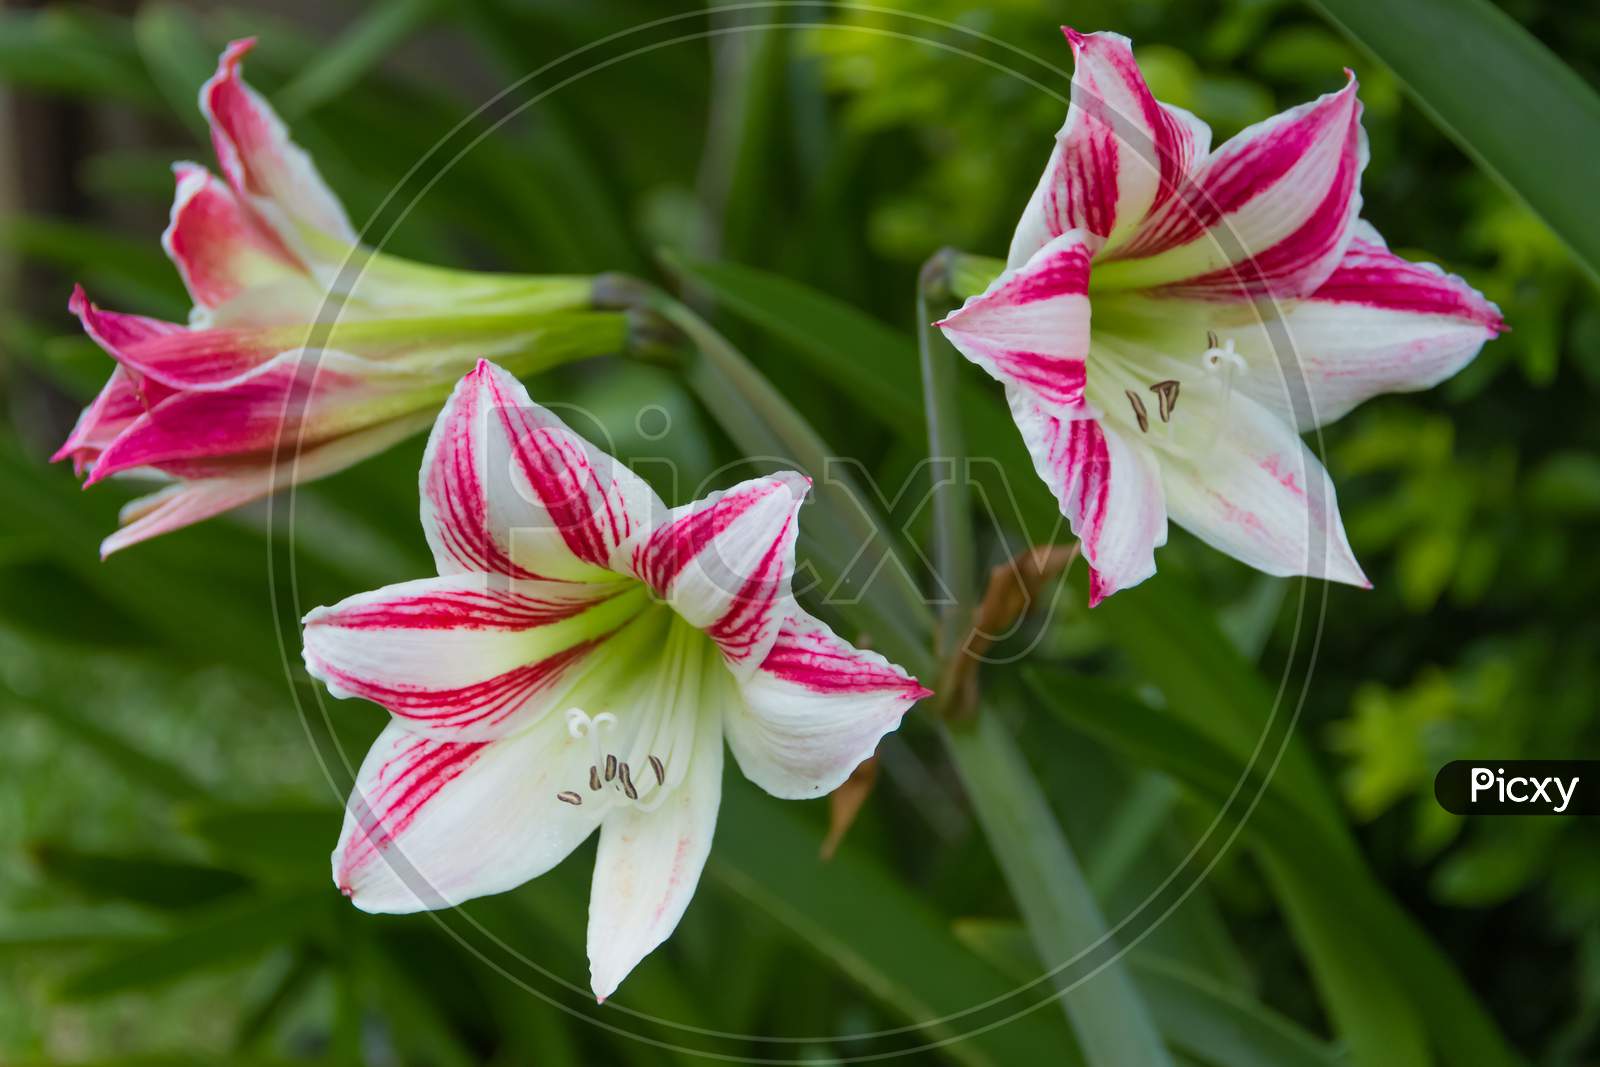 Amarcrinum , hybrid plants obtained from artificial crosses between the genera Amaryllis and Crinum